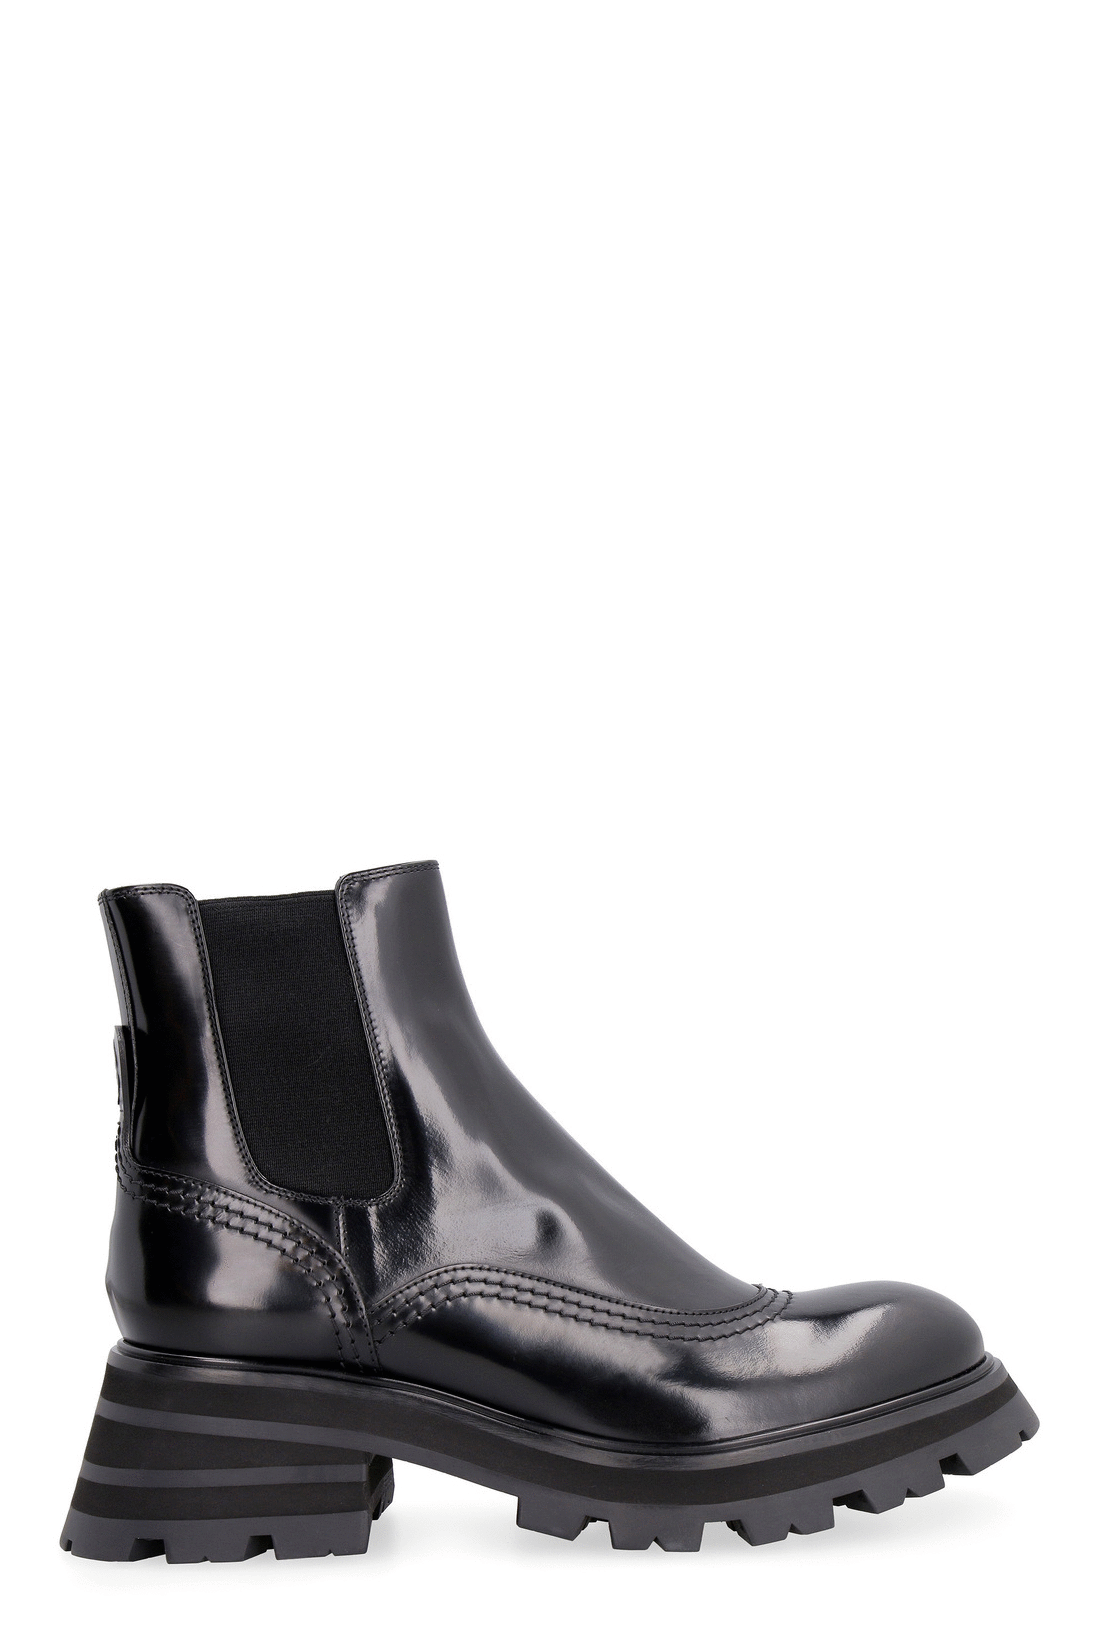 Wander leather Chelsea boots